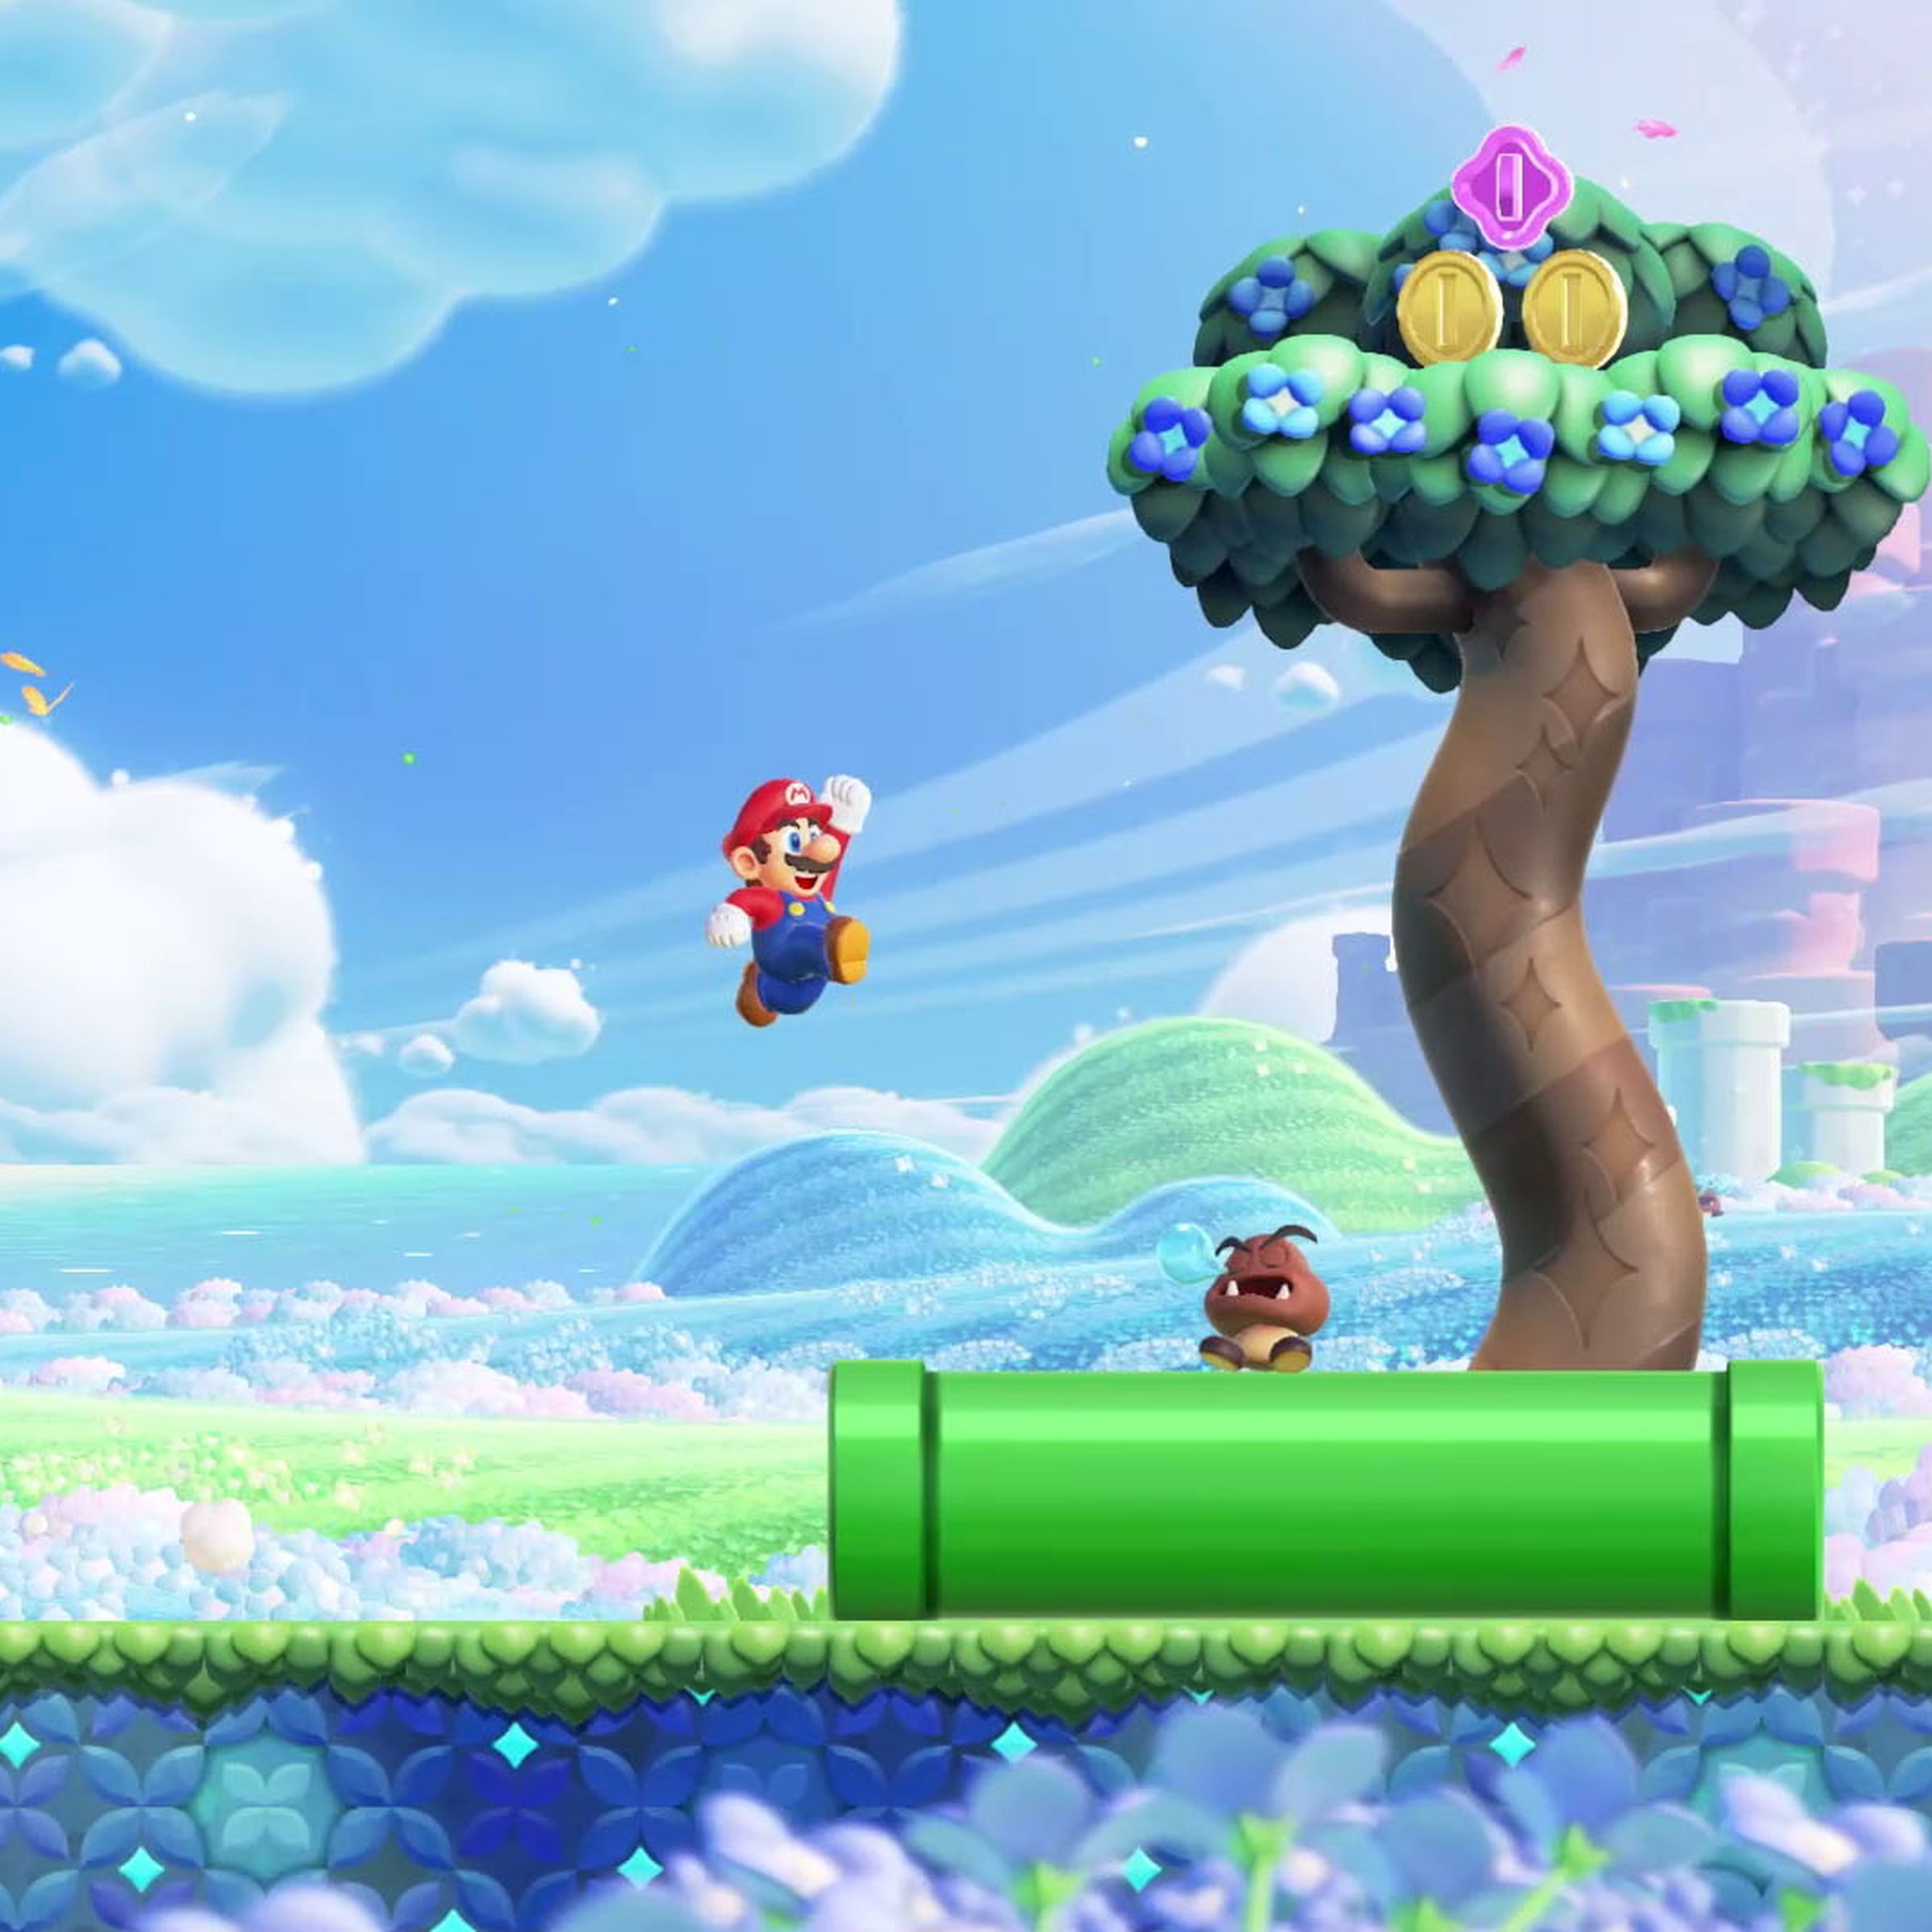 A screenshot from the video game Super Mario Bros. Wonder.